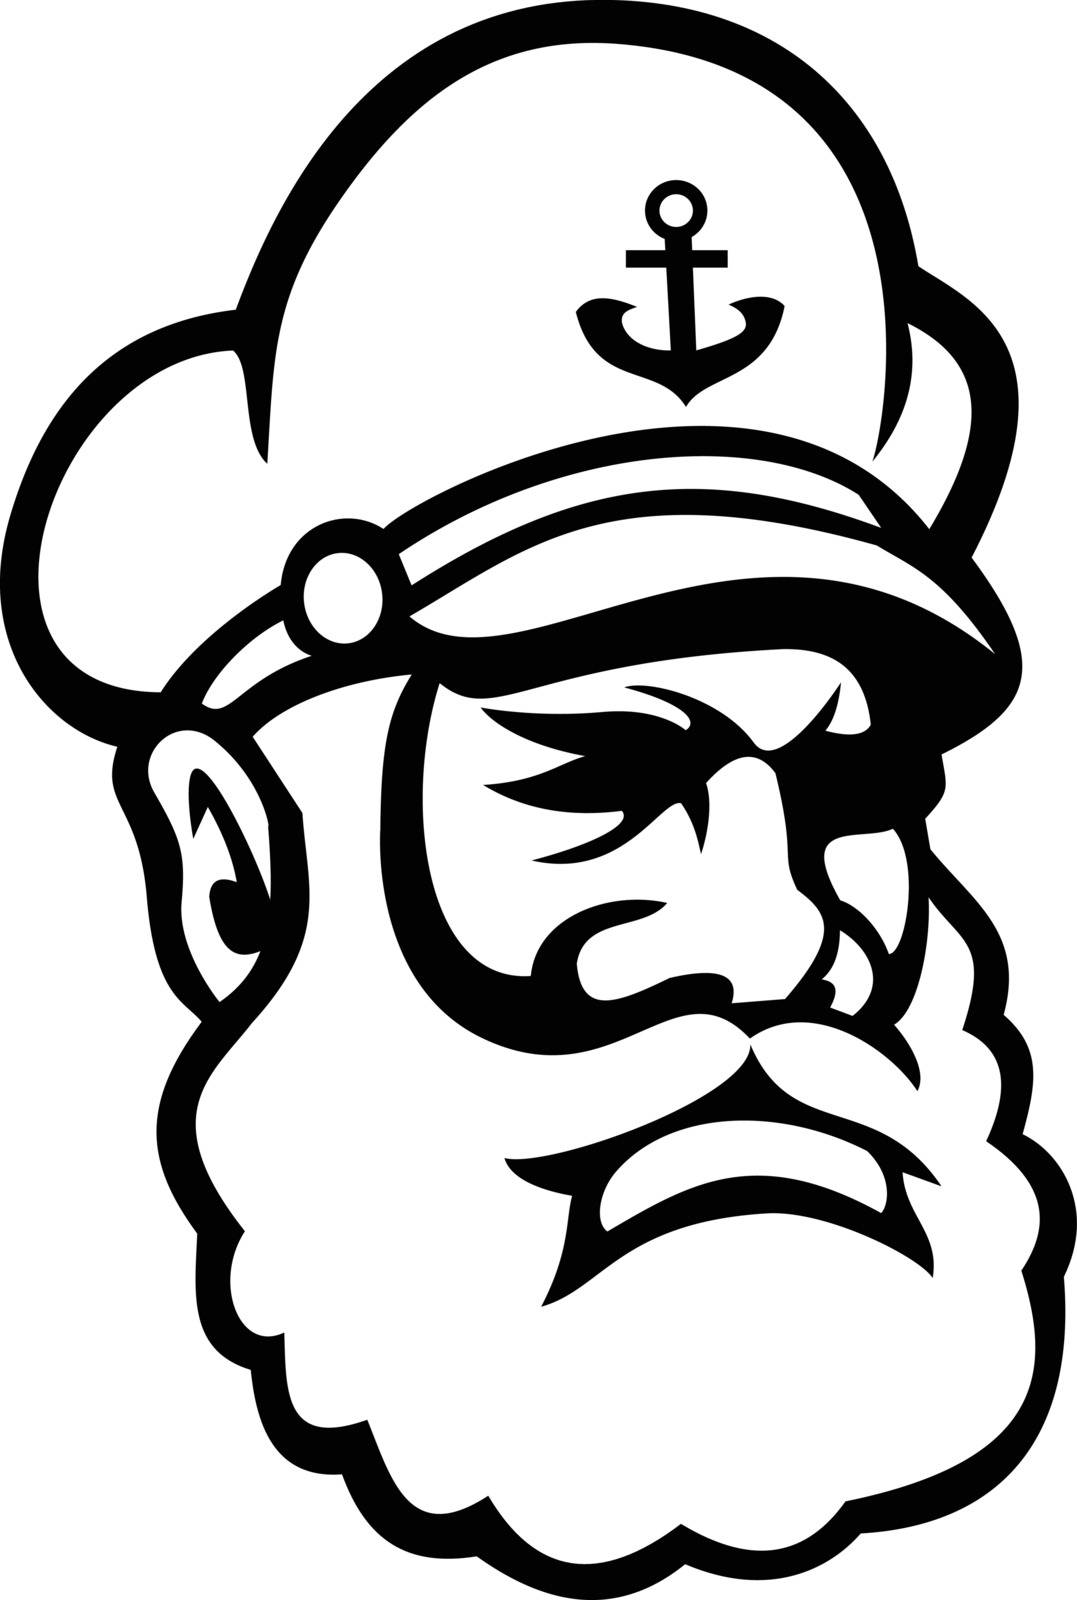 Mascot icon illustration of head of a black skipper or sea captain, ship's captain, captain, master, or shipmaster, a mariner in command of merchant isolated background in retro black and white style.